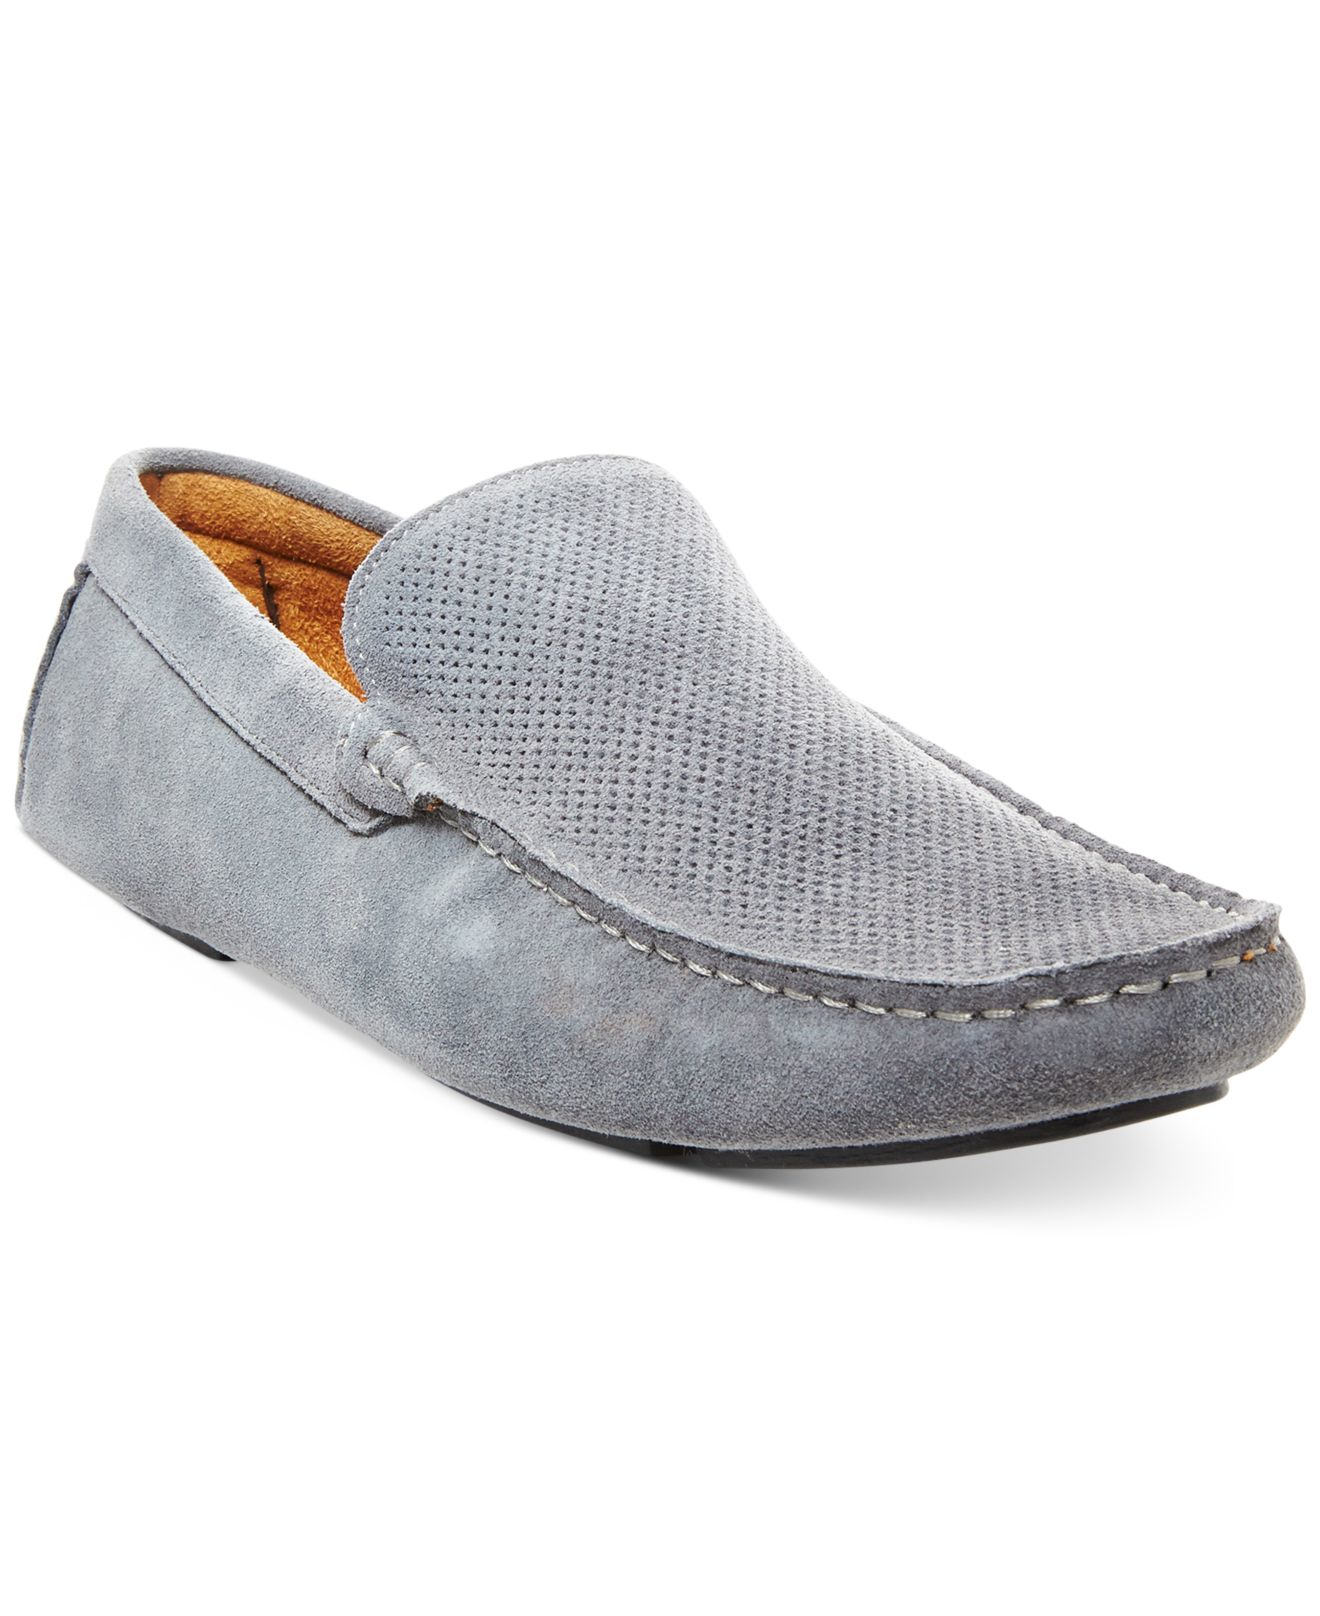 Lyst - Steve Madden Stitch Loafers in Gray for Men